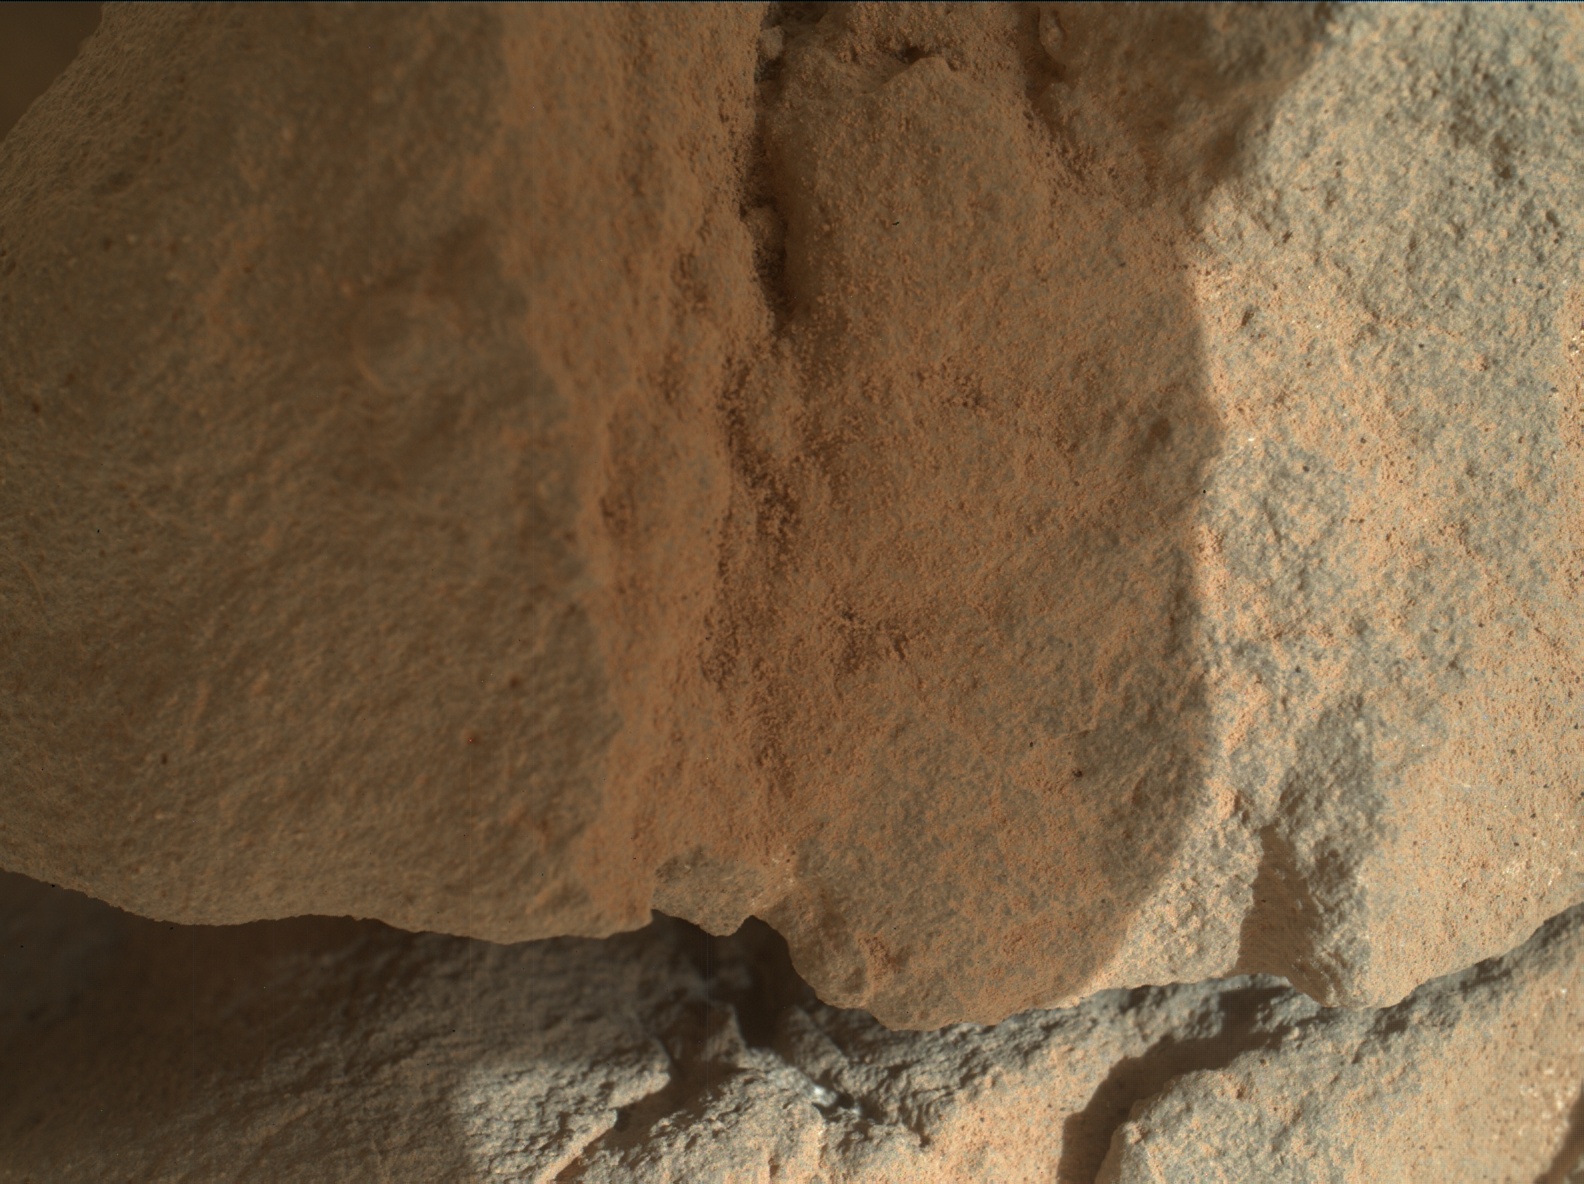 Nasa's Mars rover Curiosity acquired this image using its Mars Hand Lens Imager (MAHLI) on Sol 132